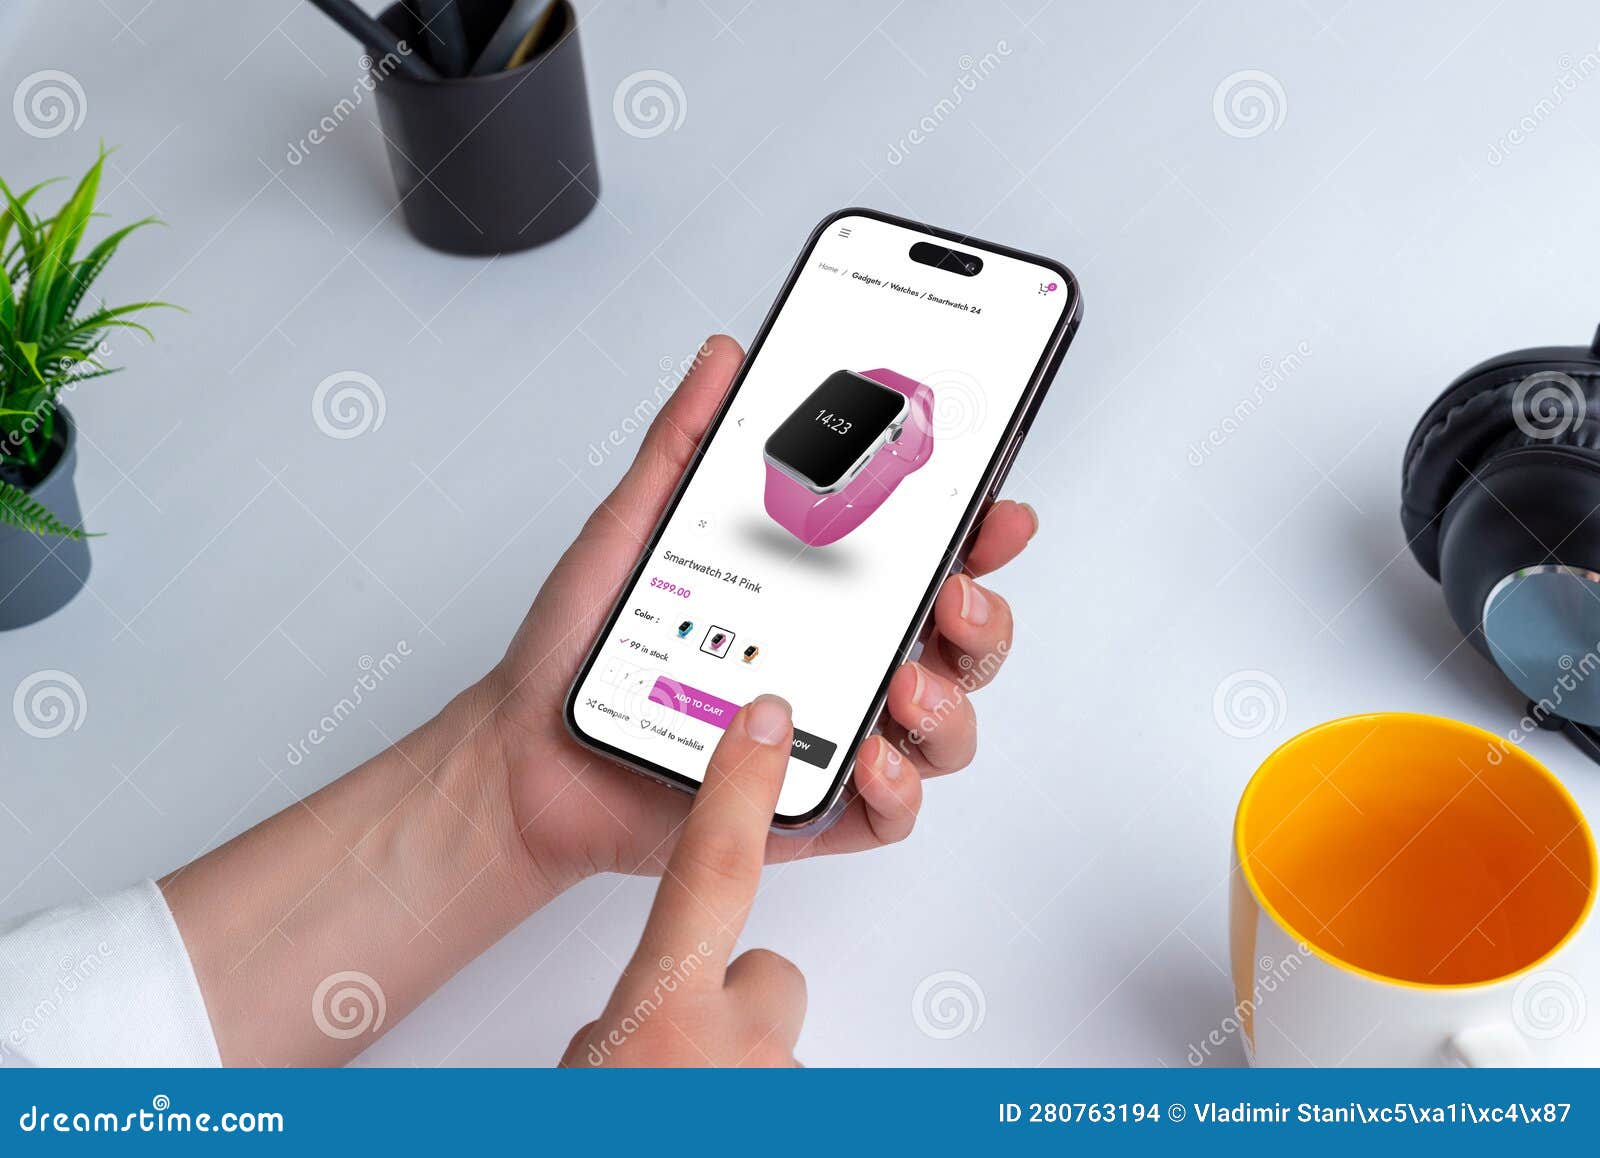 shopping smart watch online with smartphone. person holding a modern smartphone at a table indoor